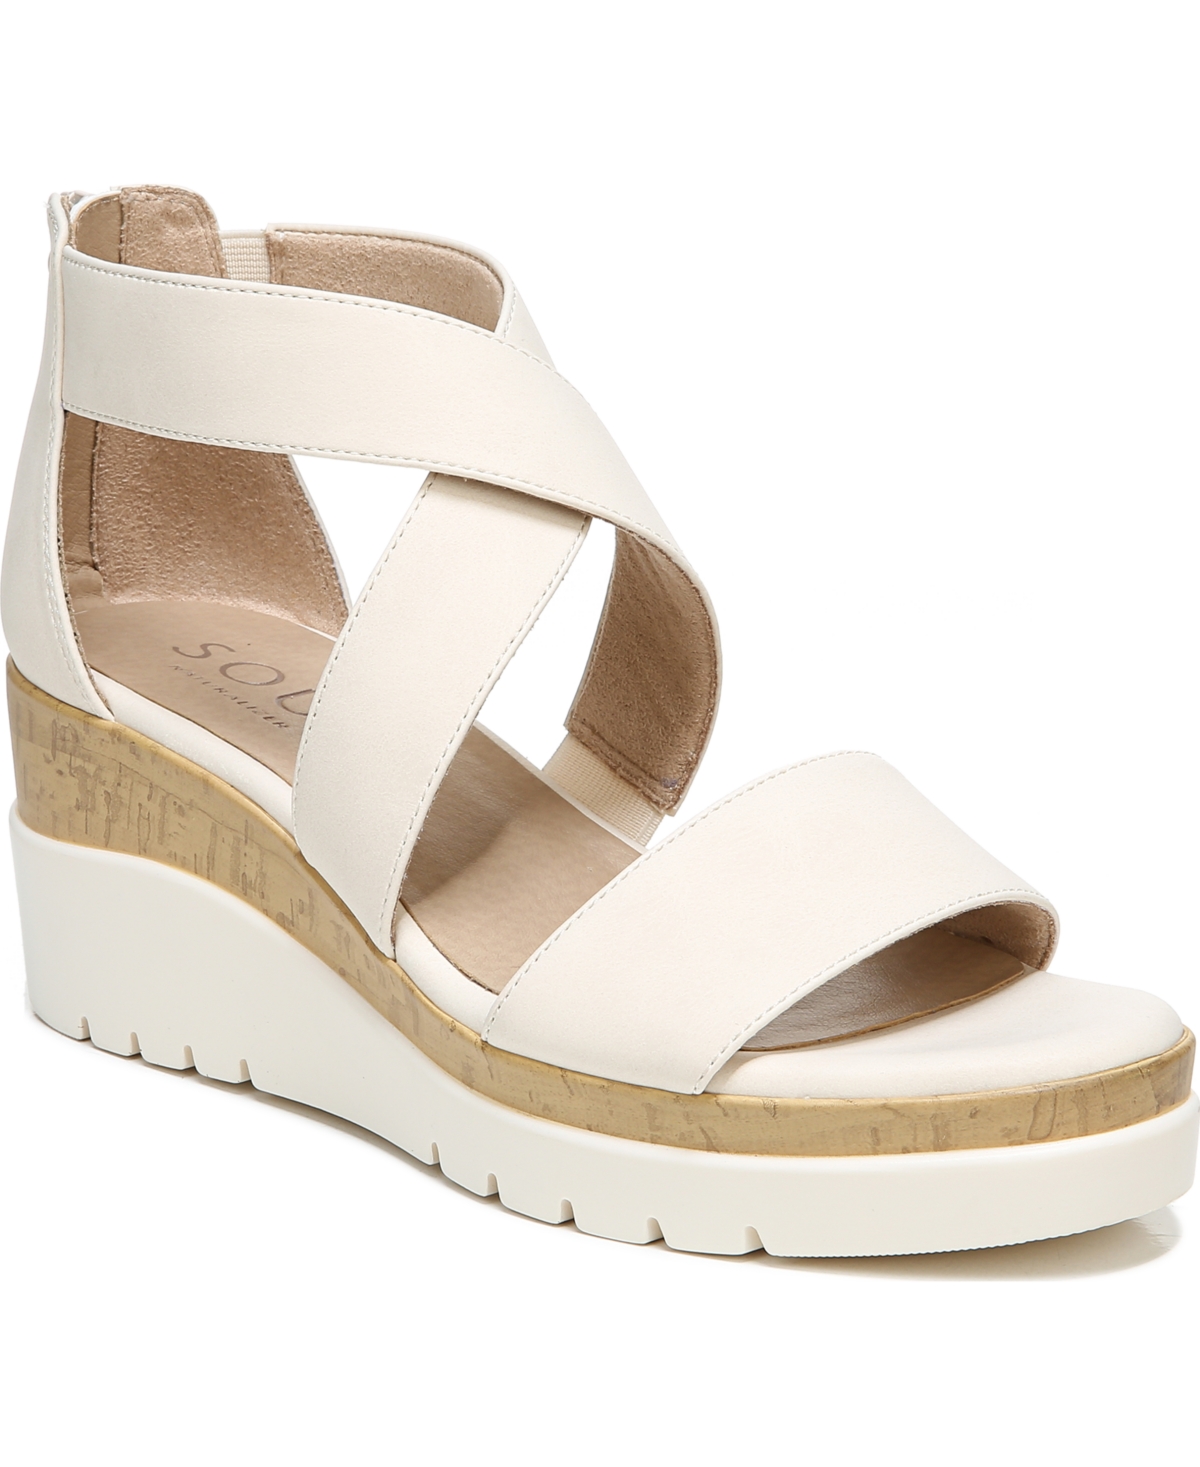 SOUL NATURALIZER GOODTIMES ANKLE STRAP WEDGE SANDALS